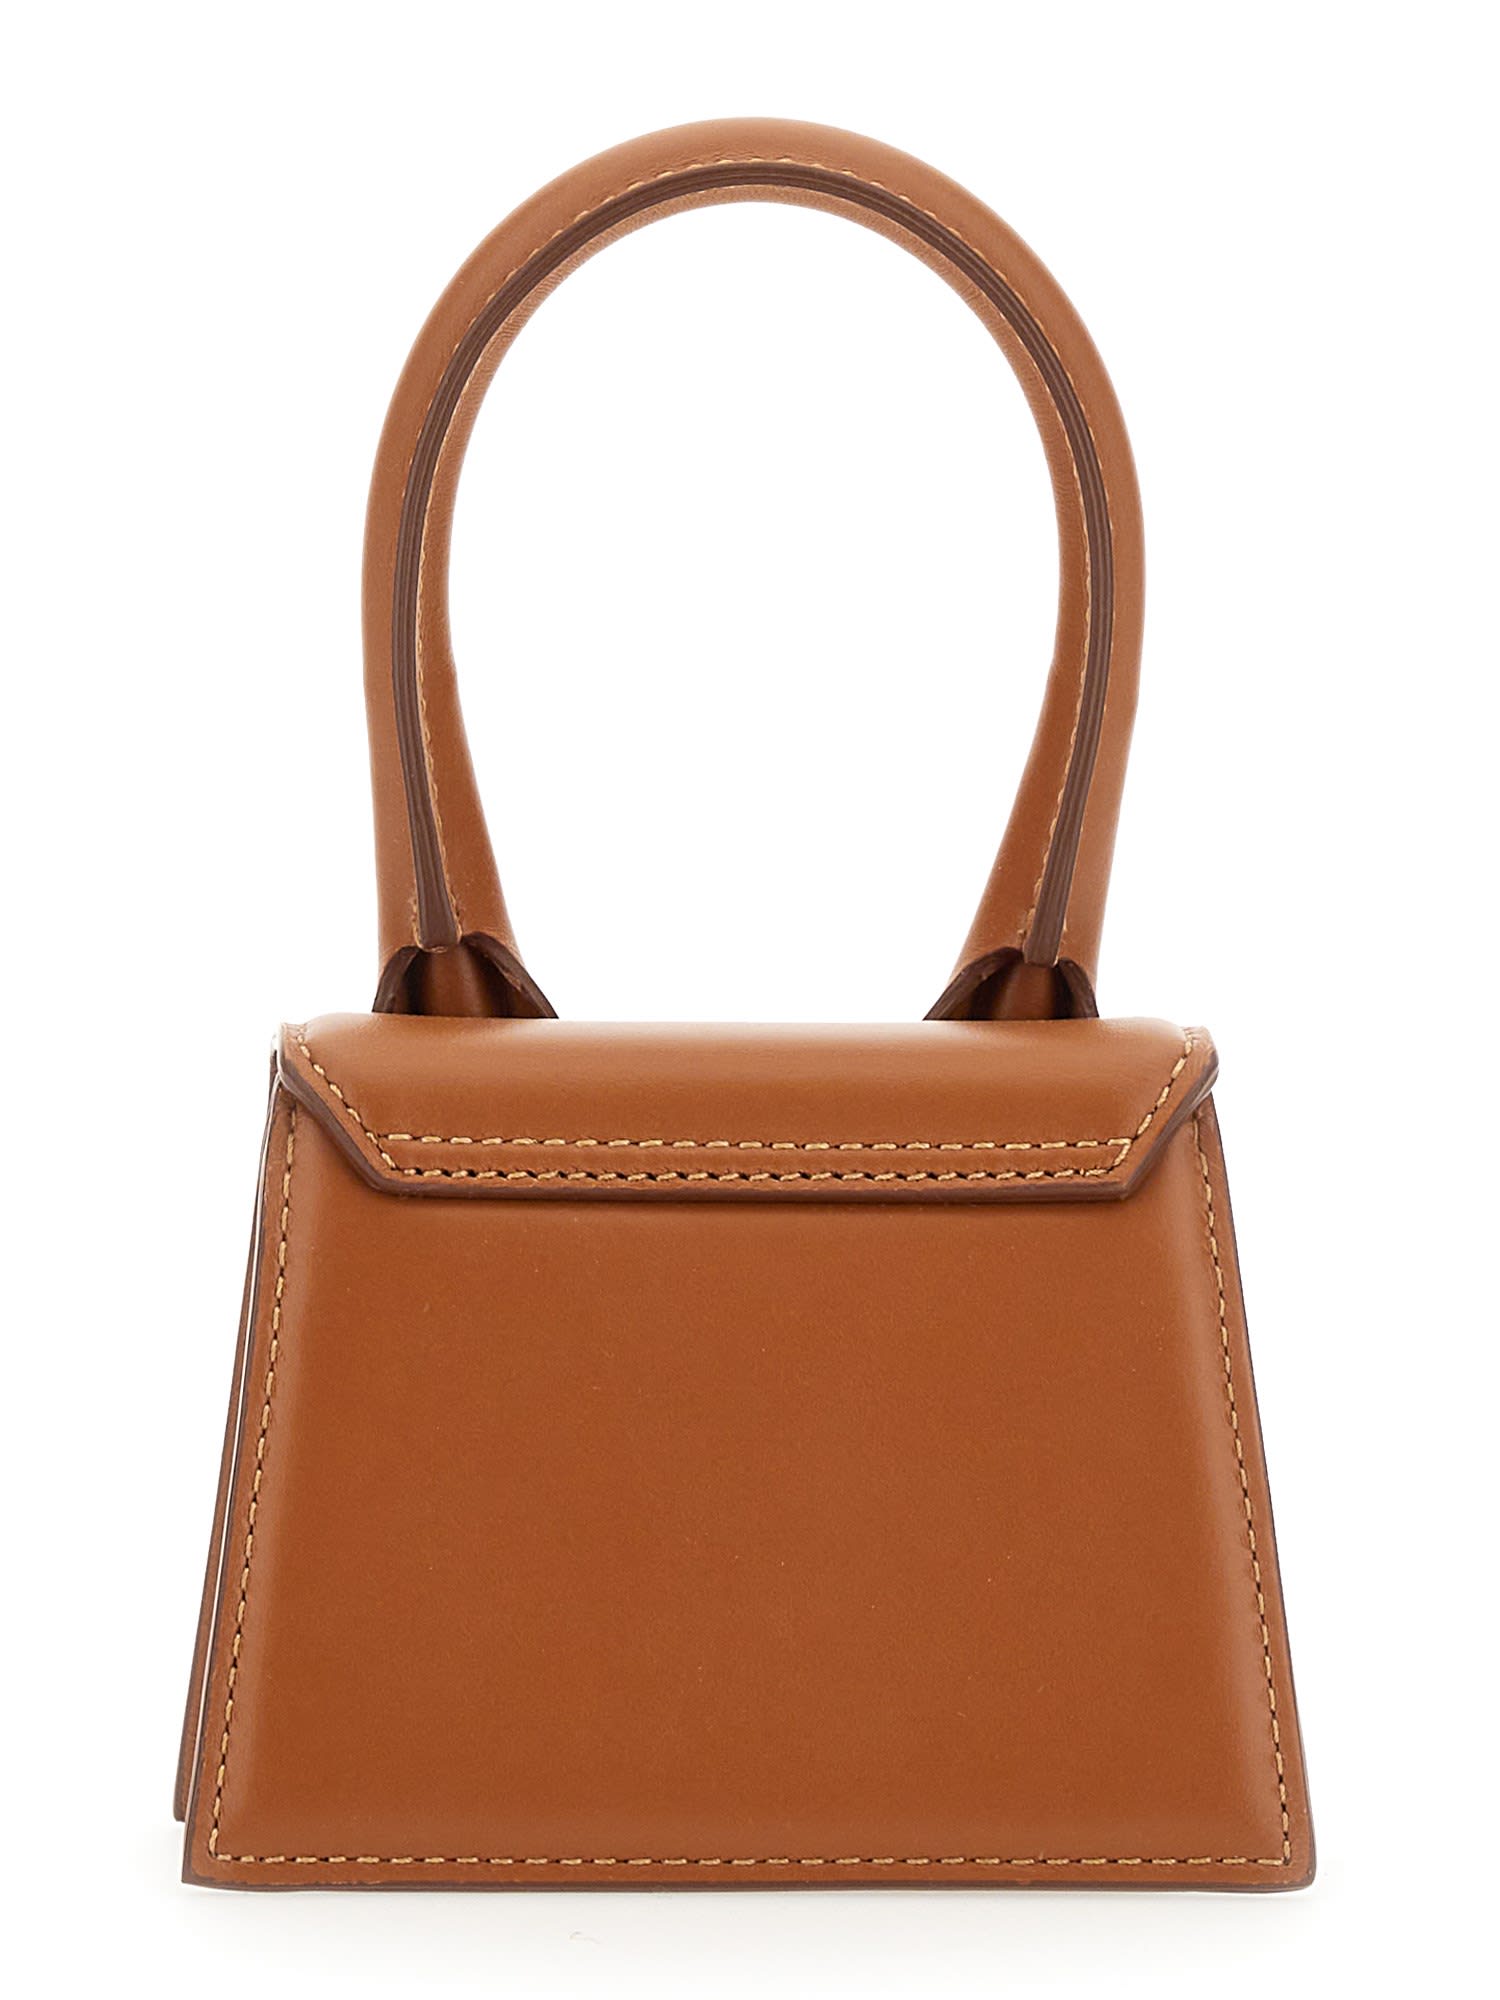 Shop Jacquemus Le Chiquito Bag In Leather Brown